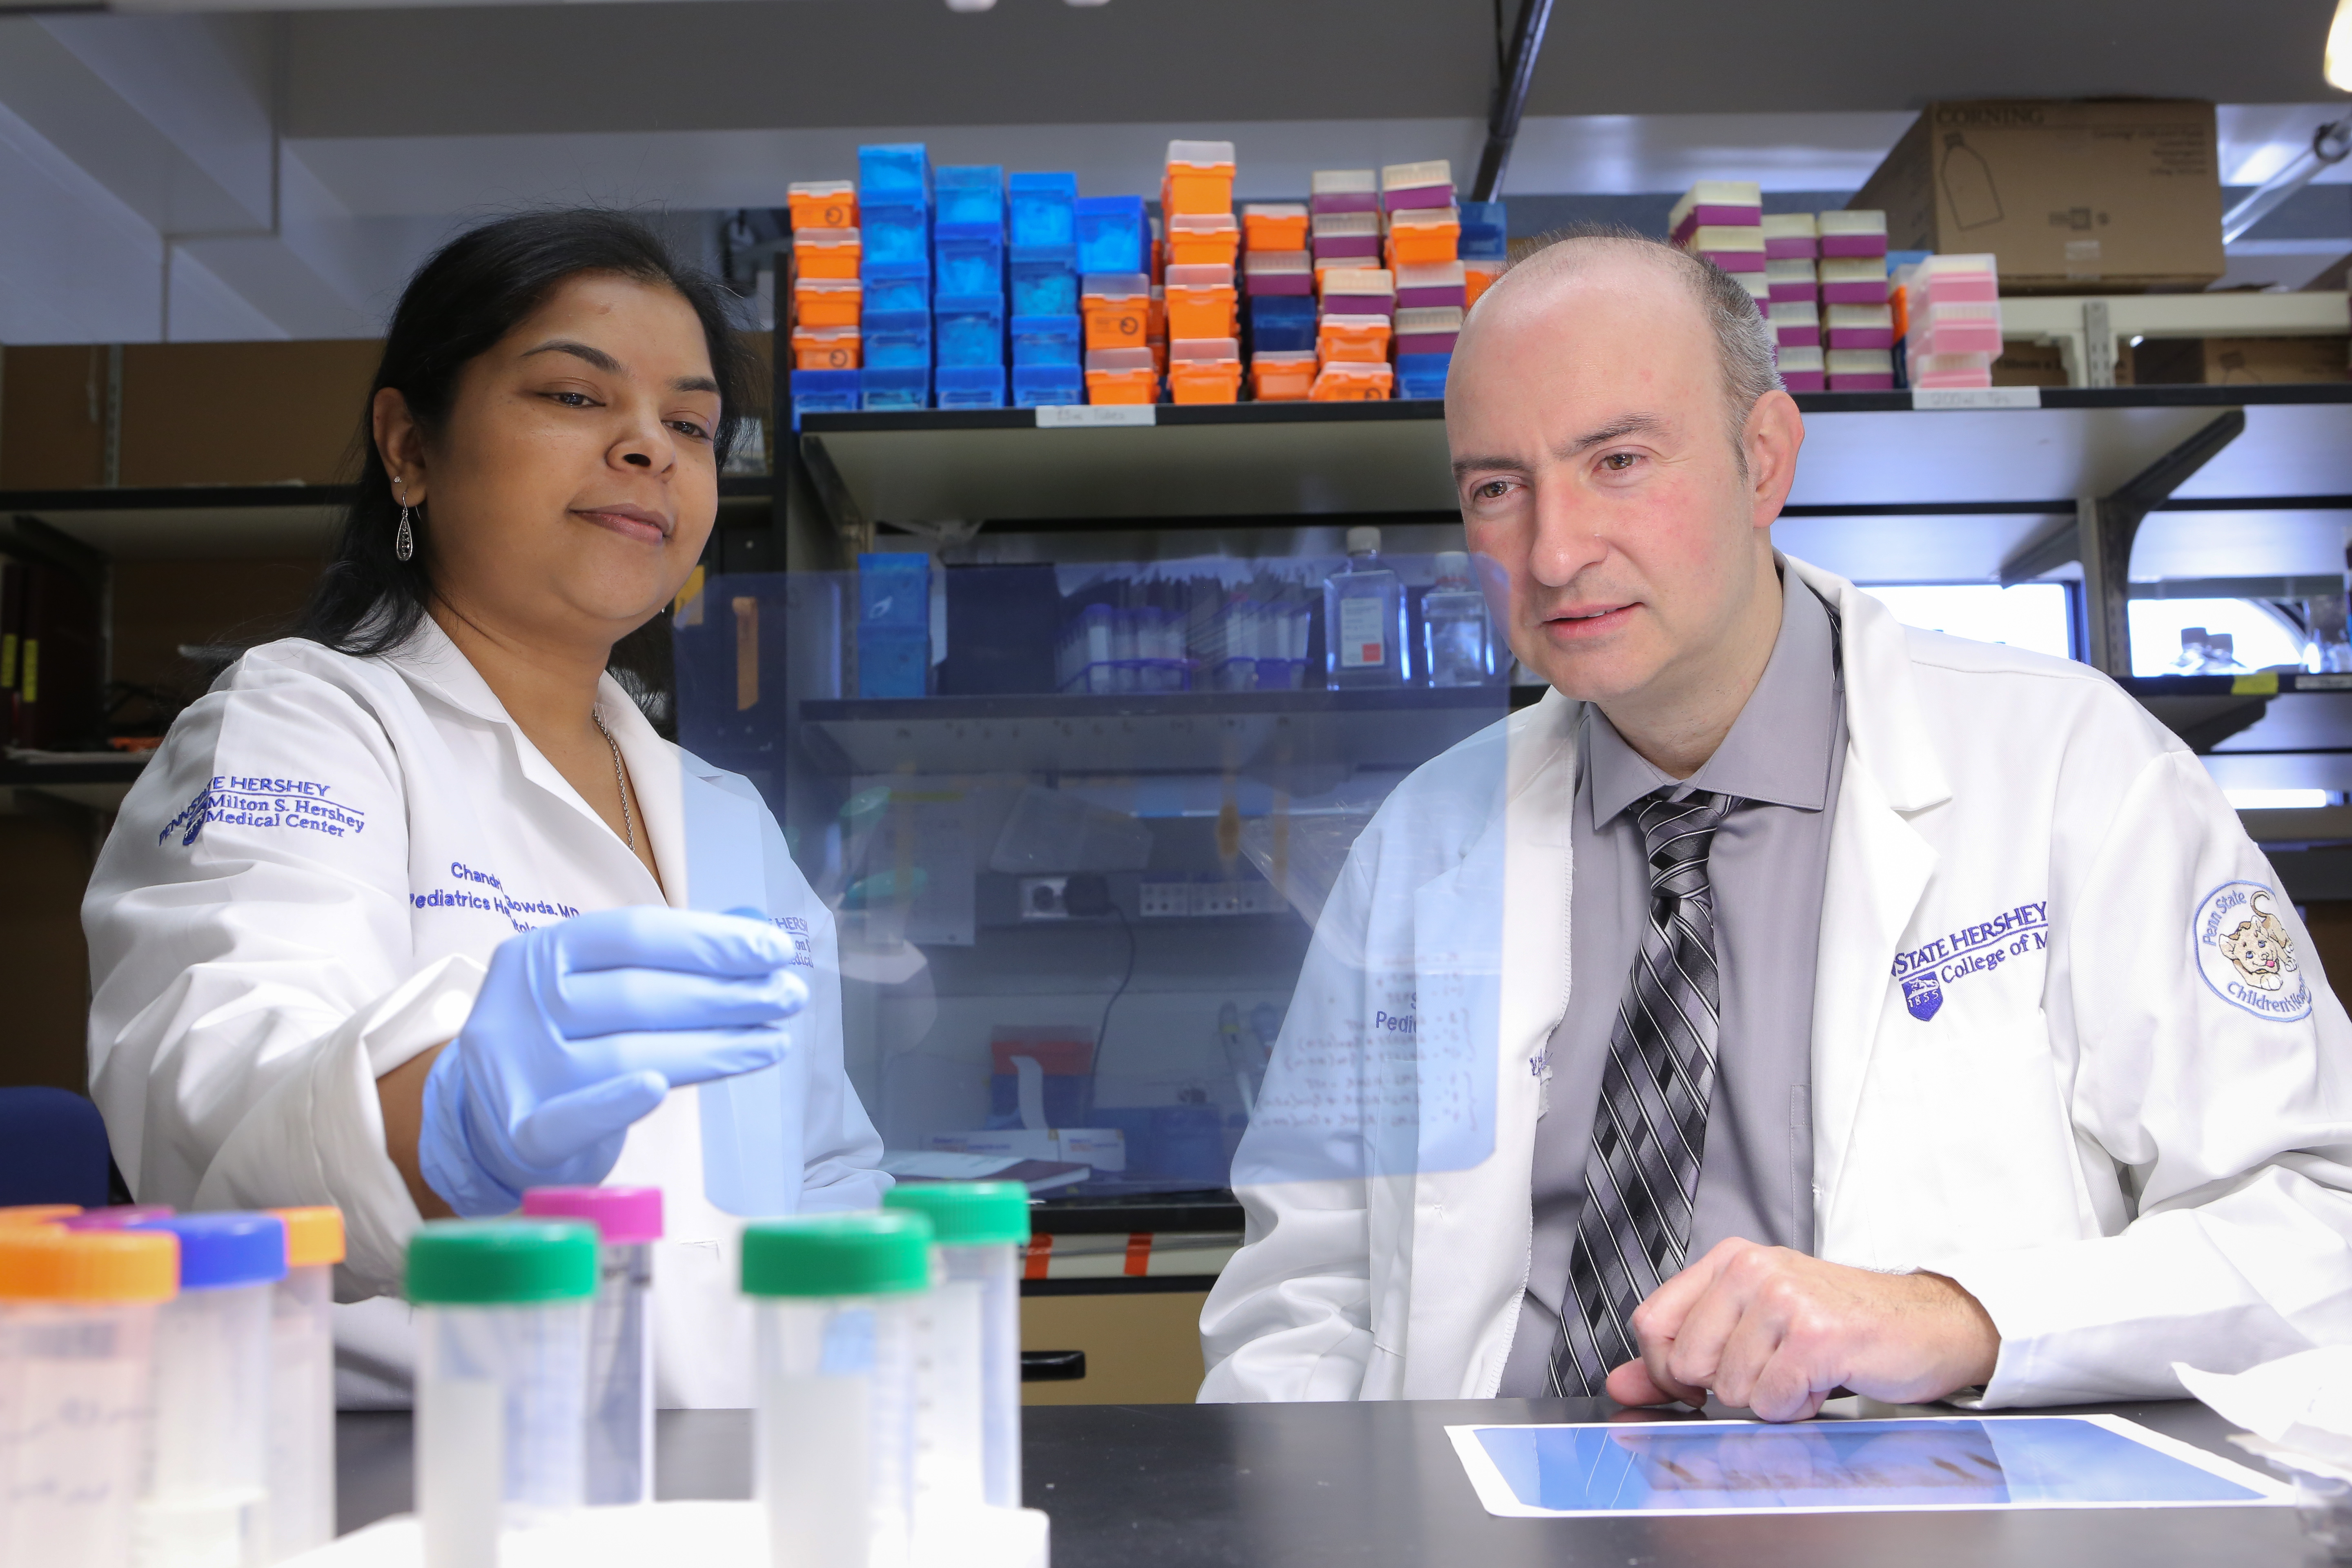 Dr. Chandrika Gowda is seen with her mentor, Dr. Sinisa Dovat. Gowda recently received a 2017 Young Investigator Award for her work in pediatric hematology/oncology. The two investigators are picture in a lab, with sample vials on the table in front of them and laboratory equipment visible in the background.